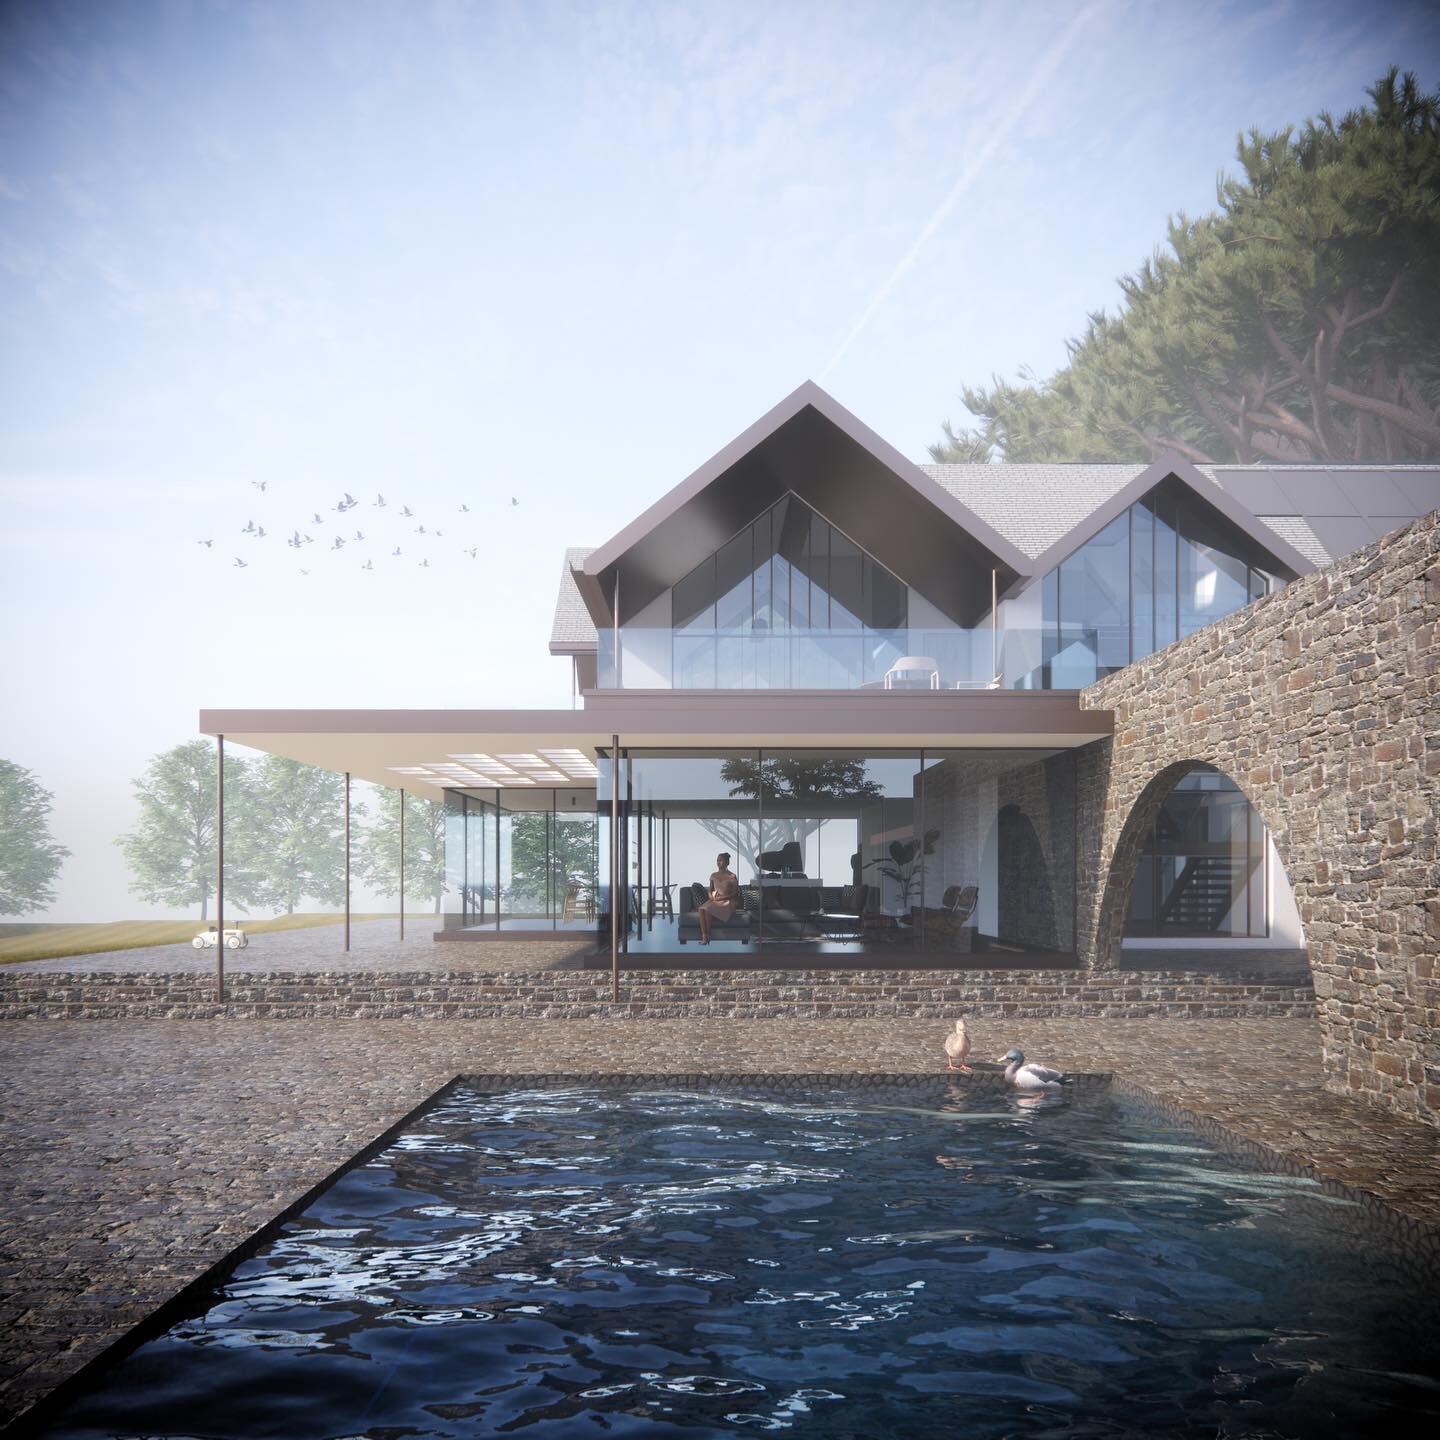 Planning permission received for a substantial extension and renovation project for a family in Guernsey, C.I. Well done and thank-you to everyone involved to get the project to this stage.